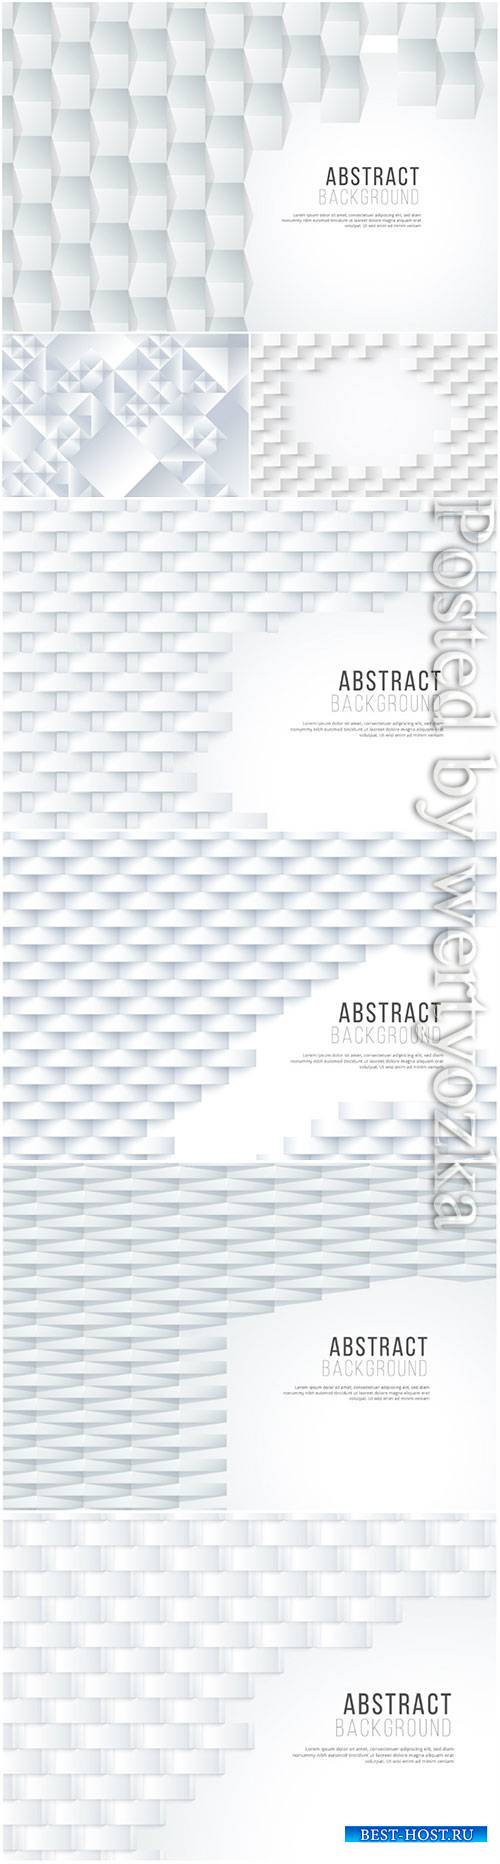 3d vector background with white abstract elements